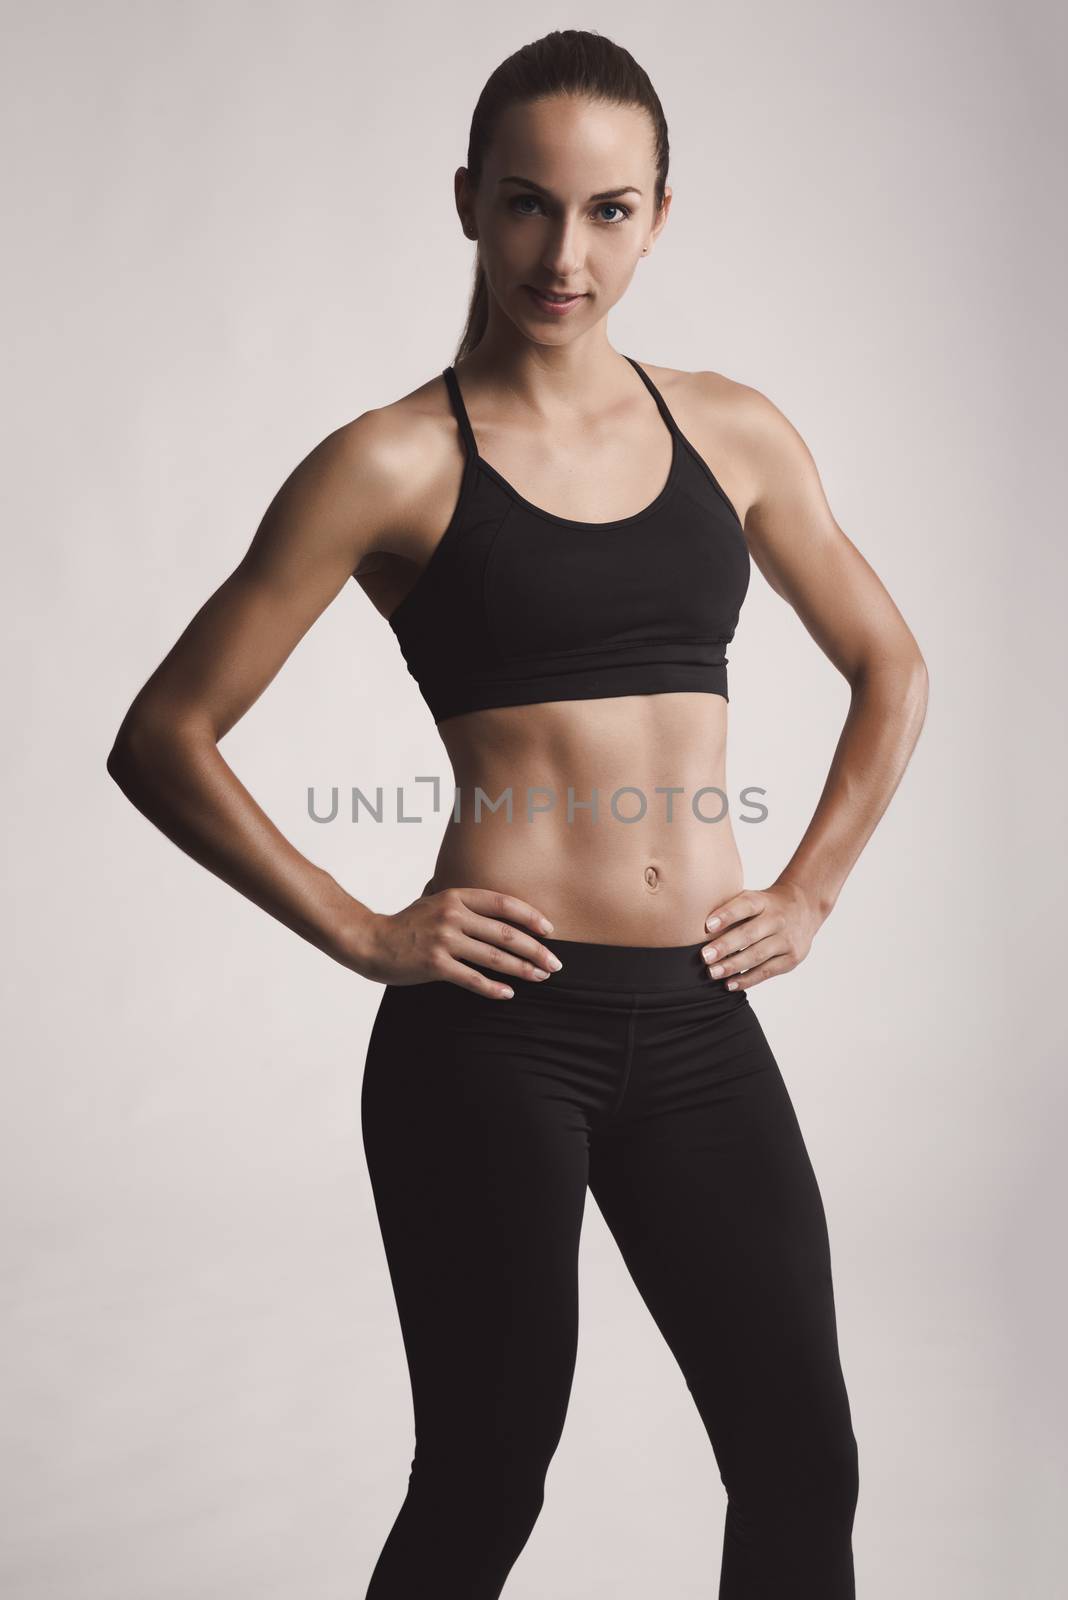 Portrait of sporty young woman with muscular body looking at camera confidently